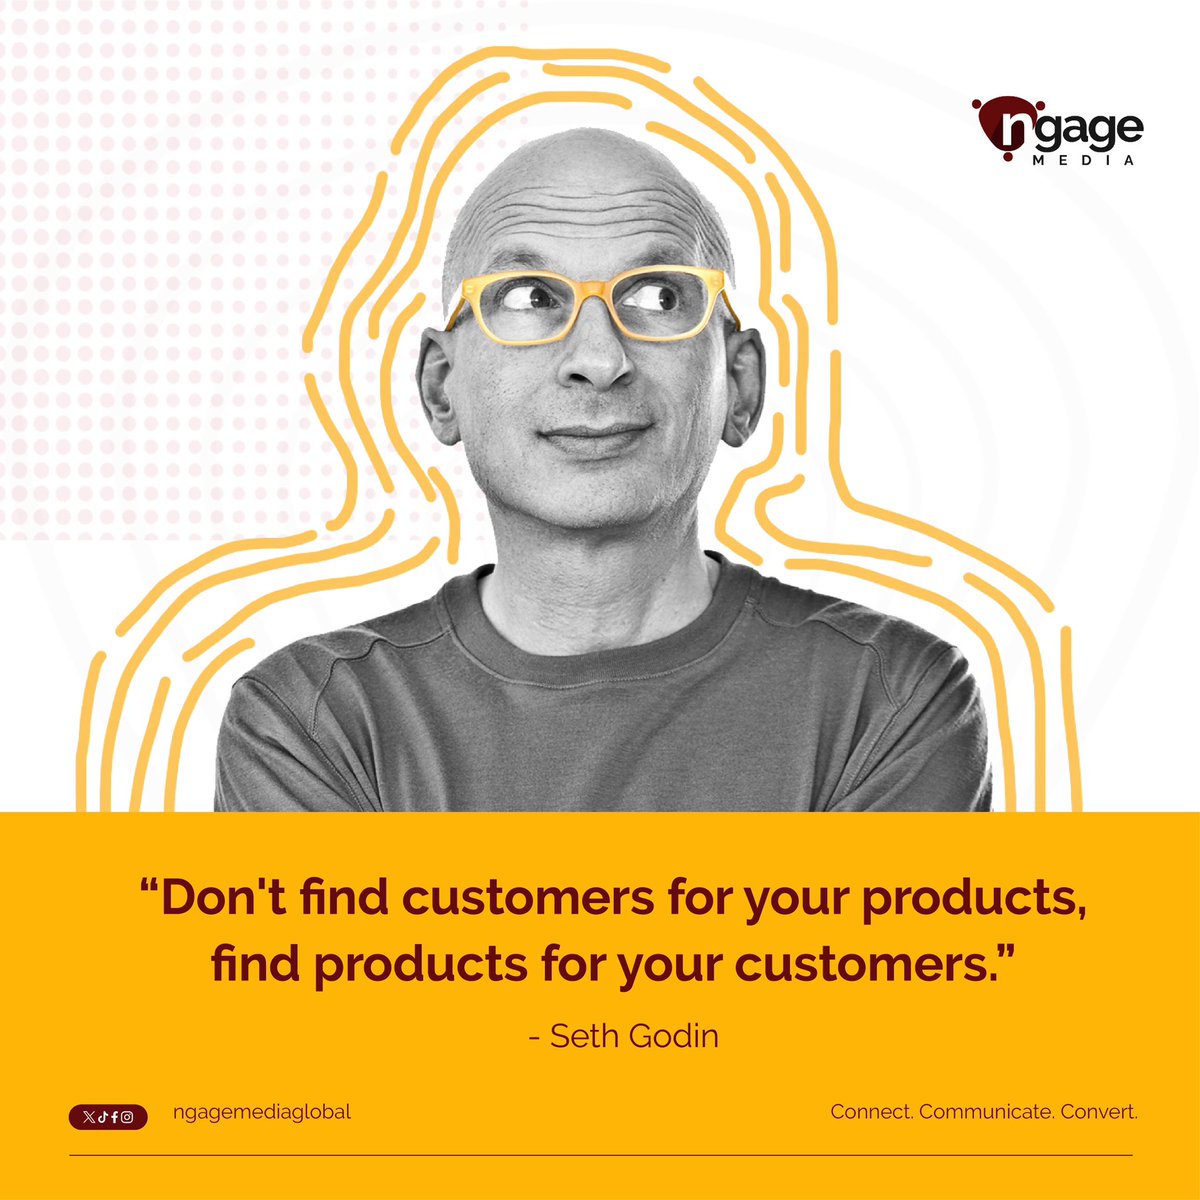 Trying to find customers after creating a product is like counting two before one. Do proper analysis, assess the market and identify your customers before creating products to ensure success in your business. #troppersofngage #marketingandcommunication #branding #marketingquote